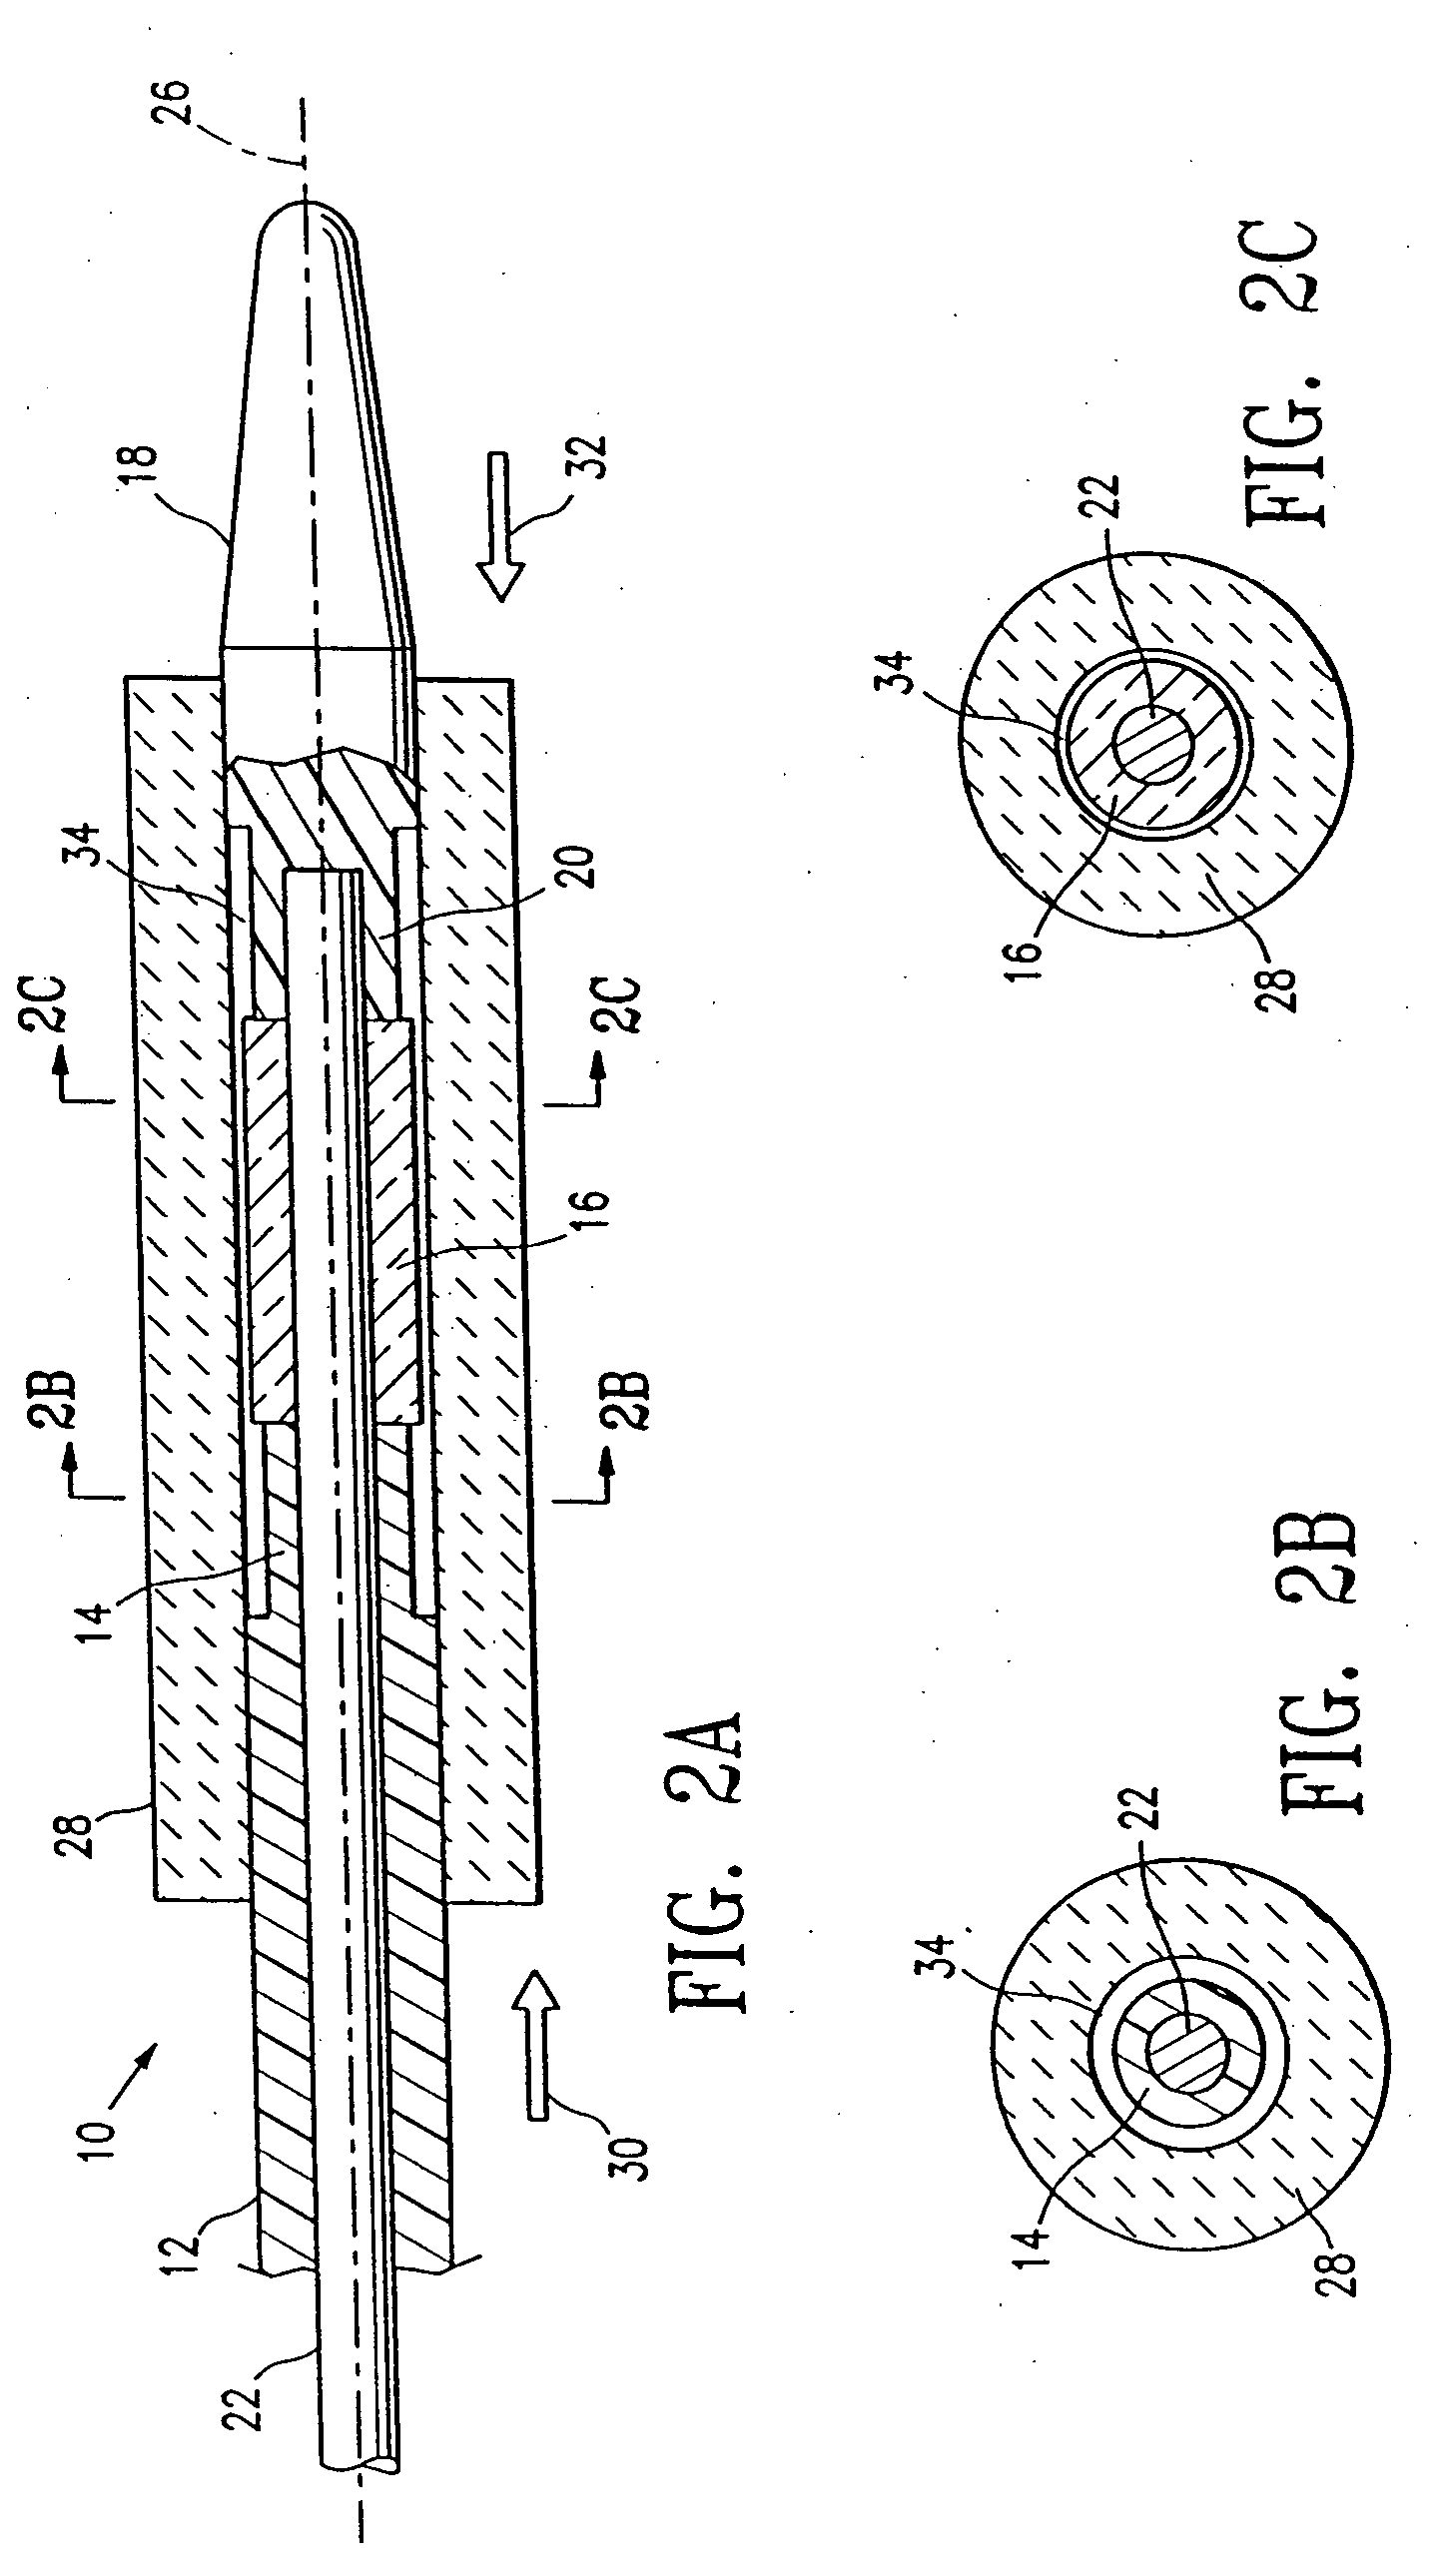 Optical window for an intracorporeal device